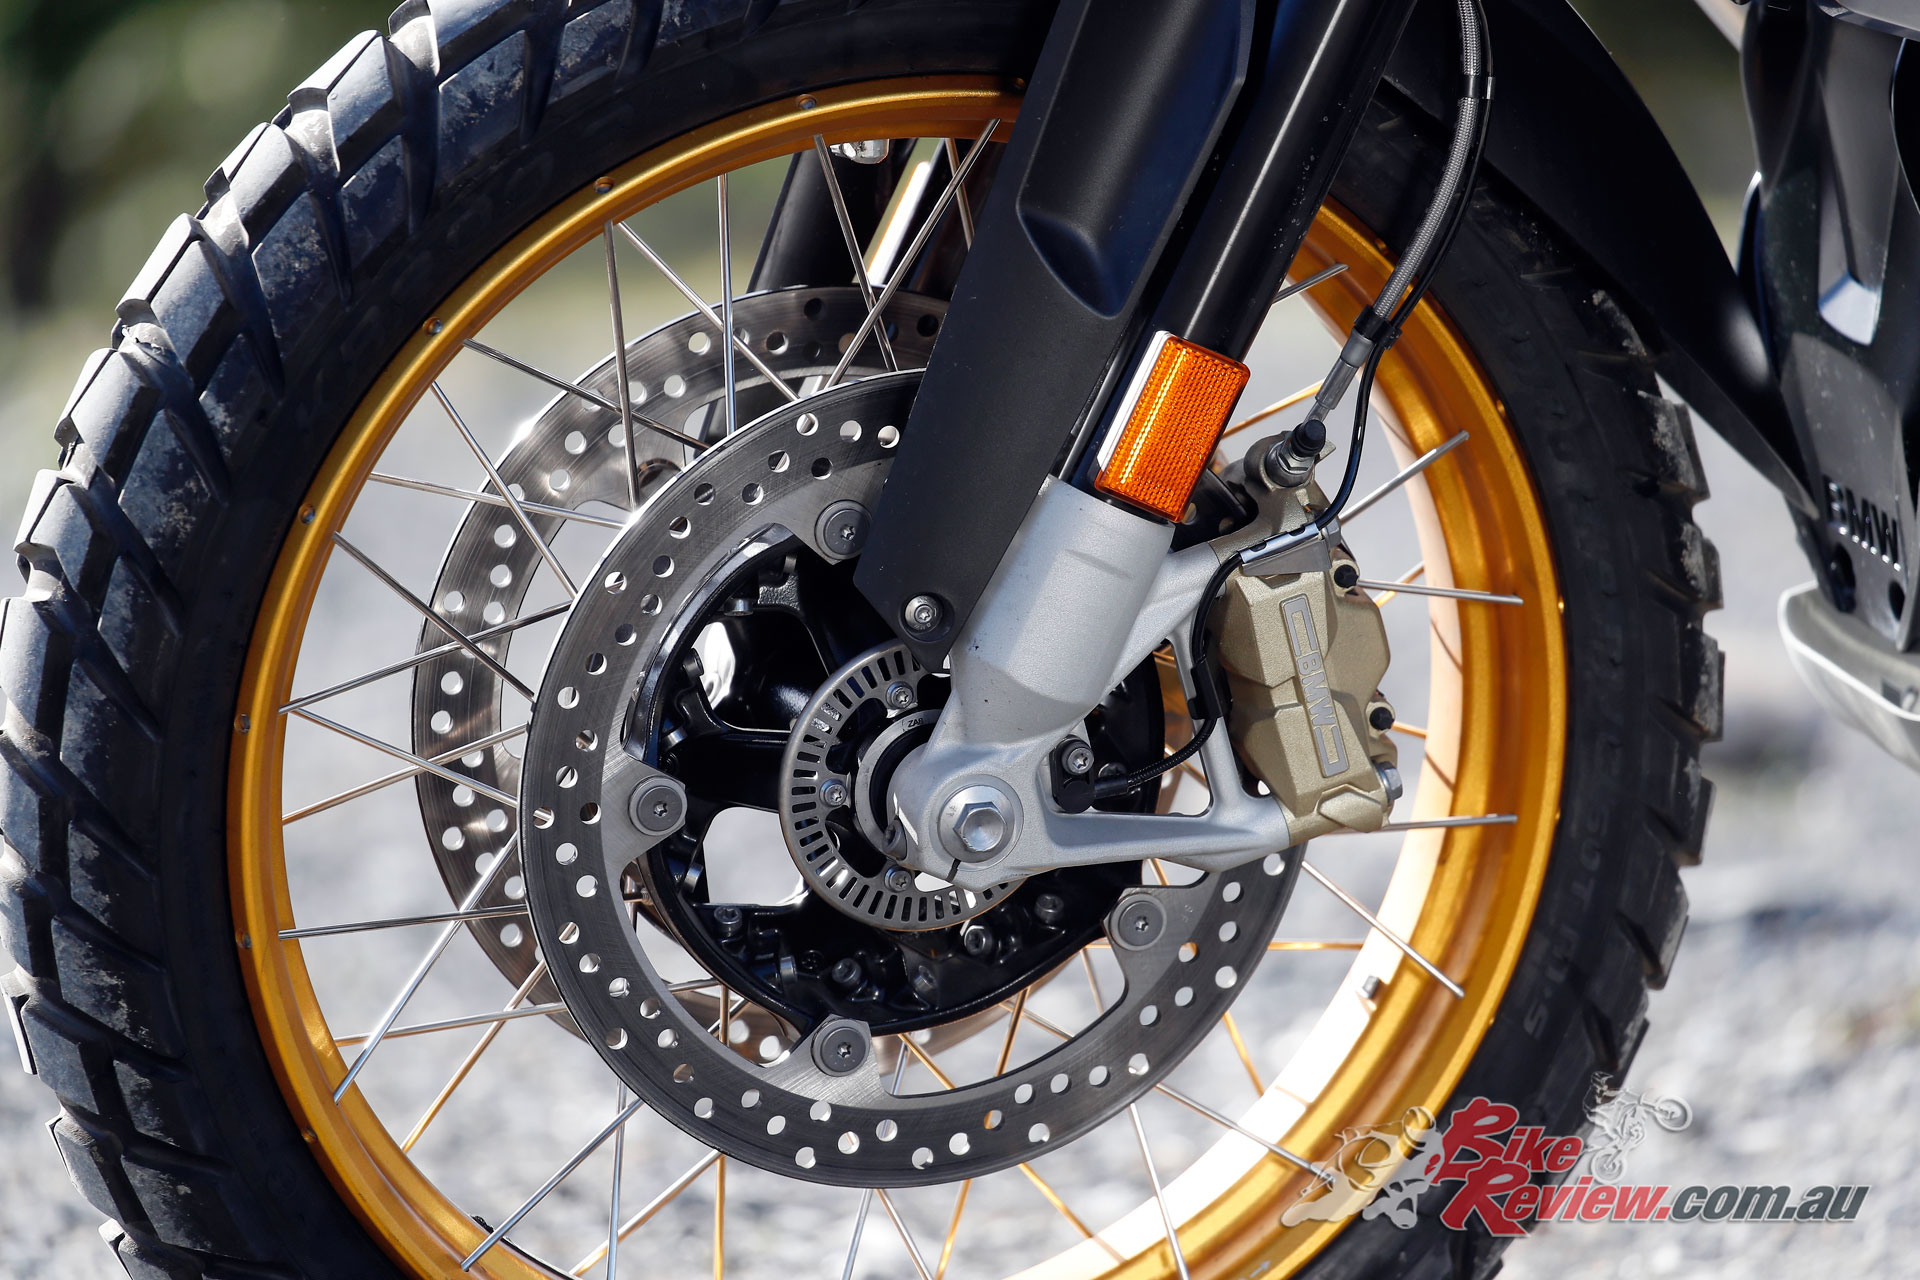 Brakes offer a high level of performance, while in off-road conditions simple grip is the biggest constraint